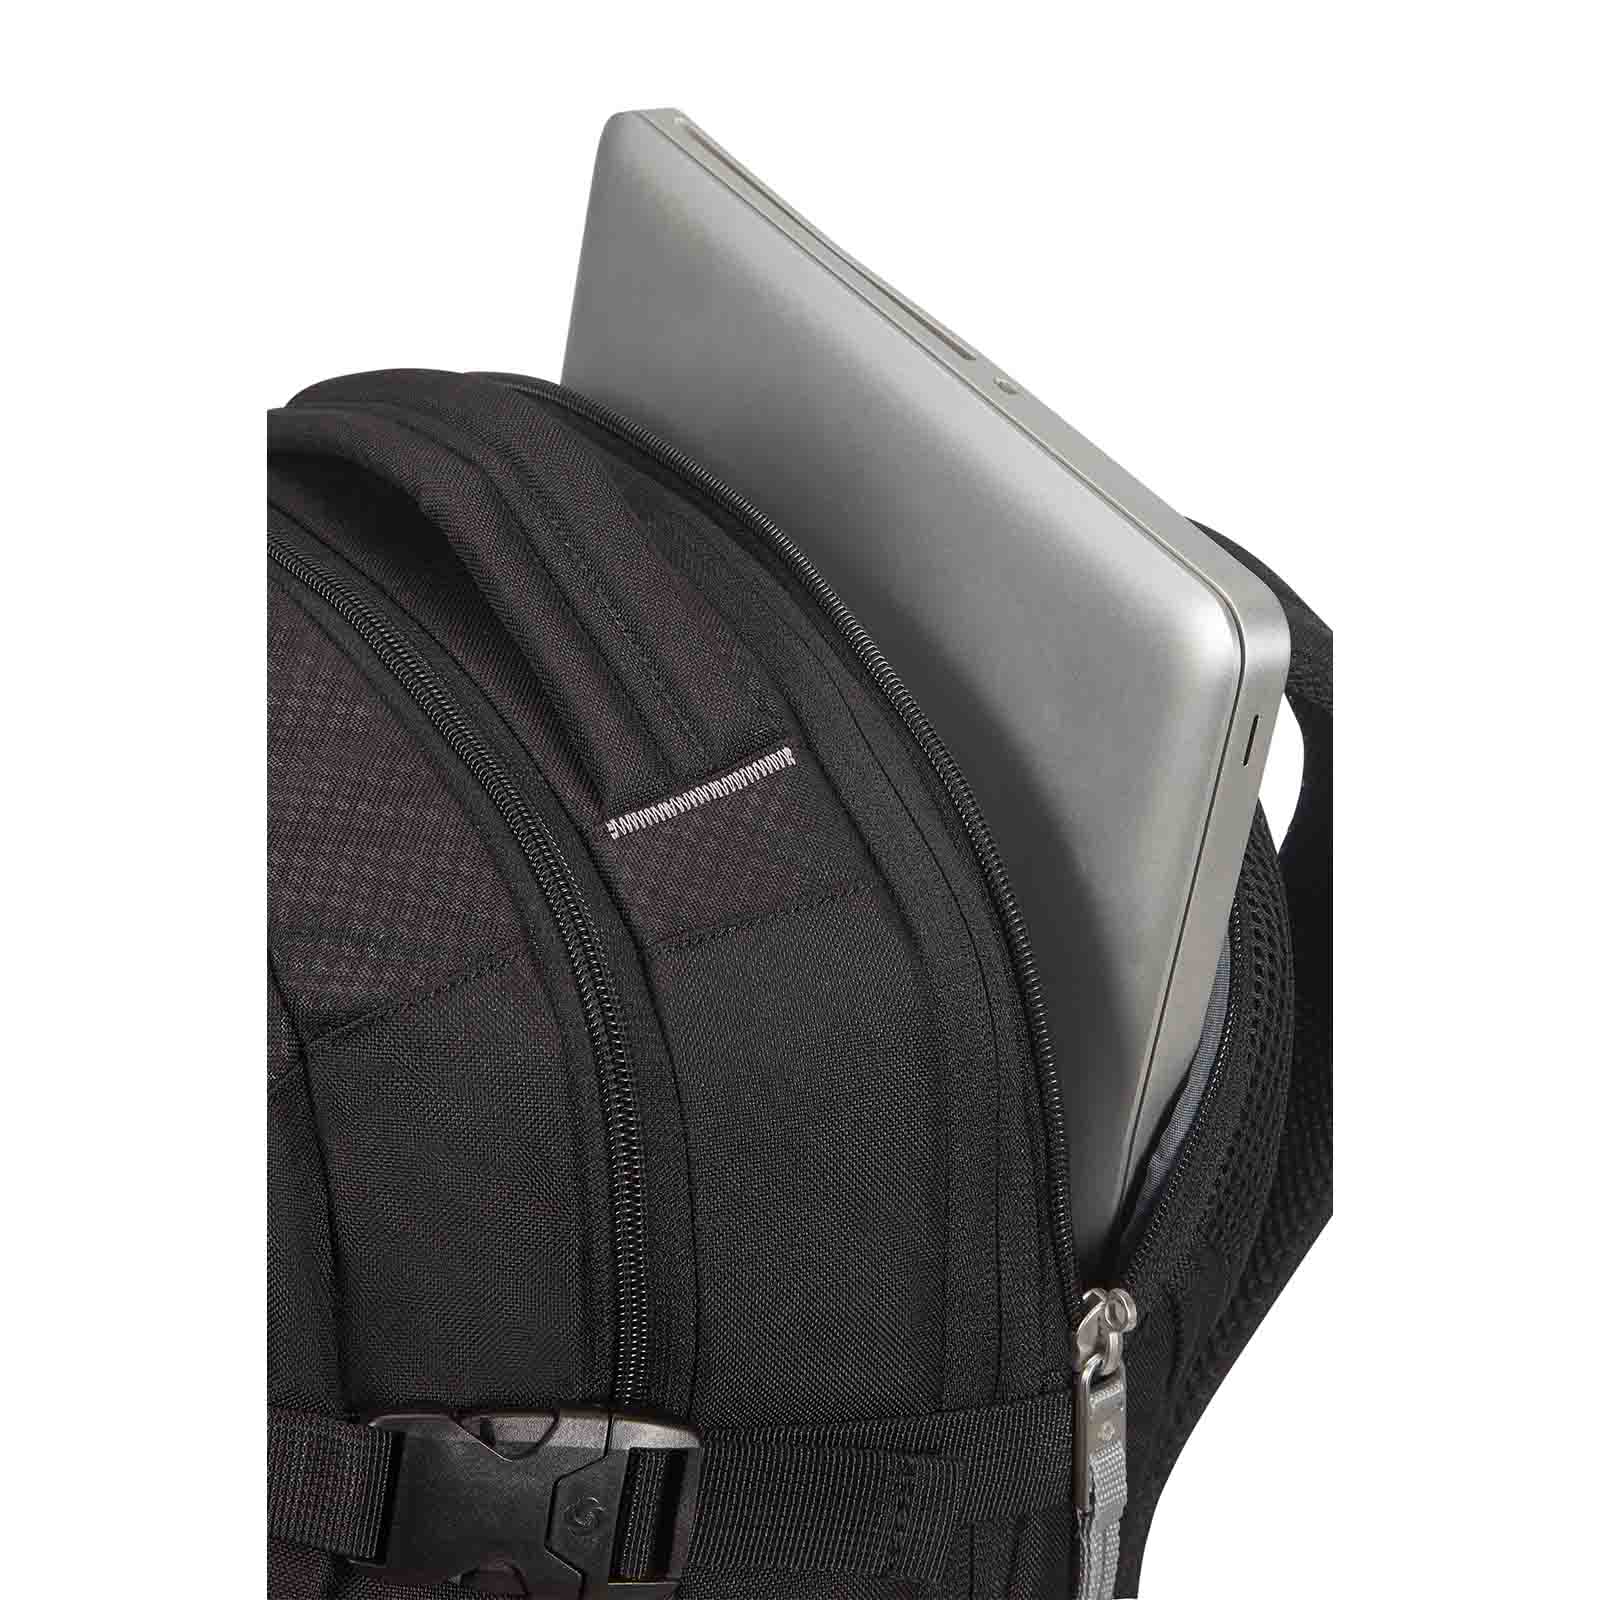 Samsonite-Sonora-15-Inch-Laptop-Backpack-Black-Laptop-Pouch